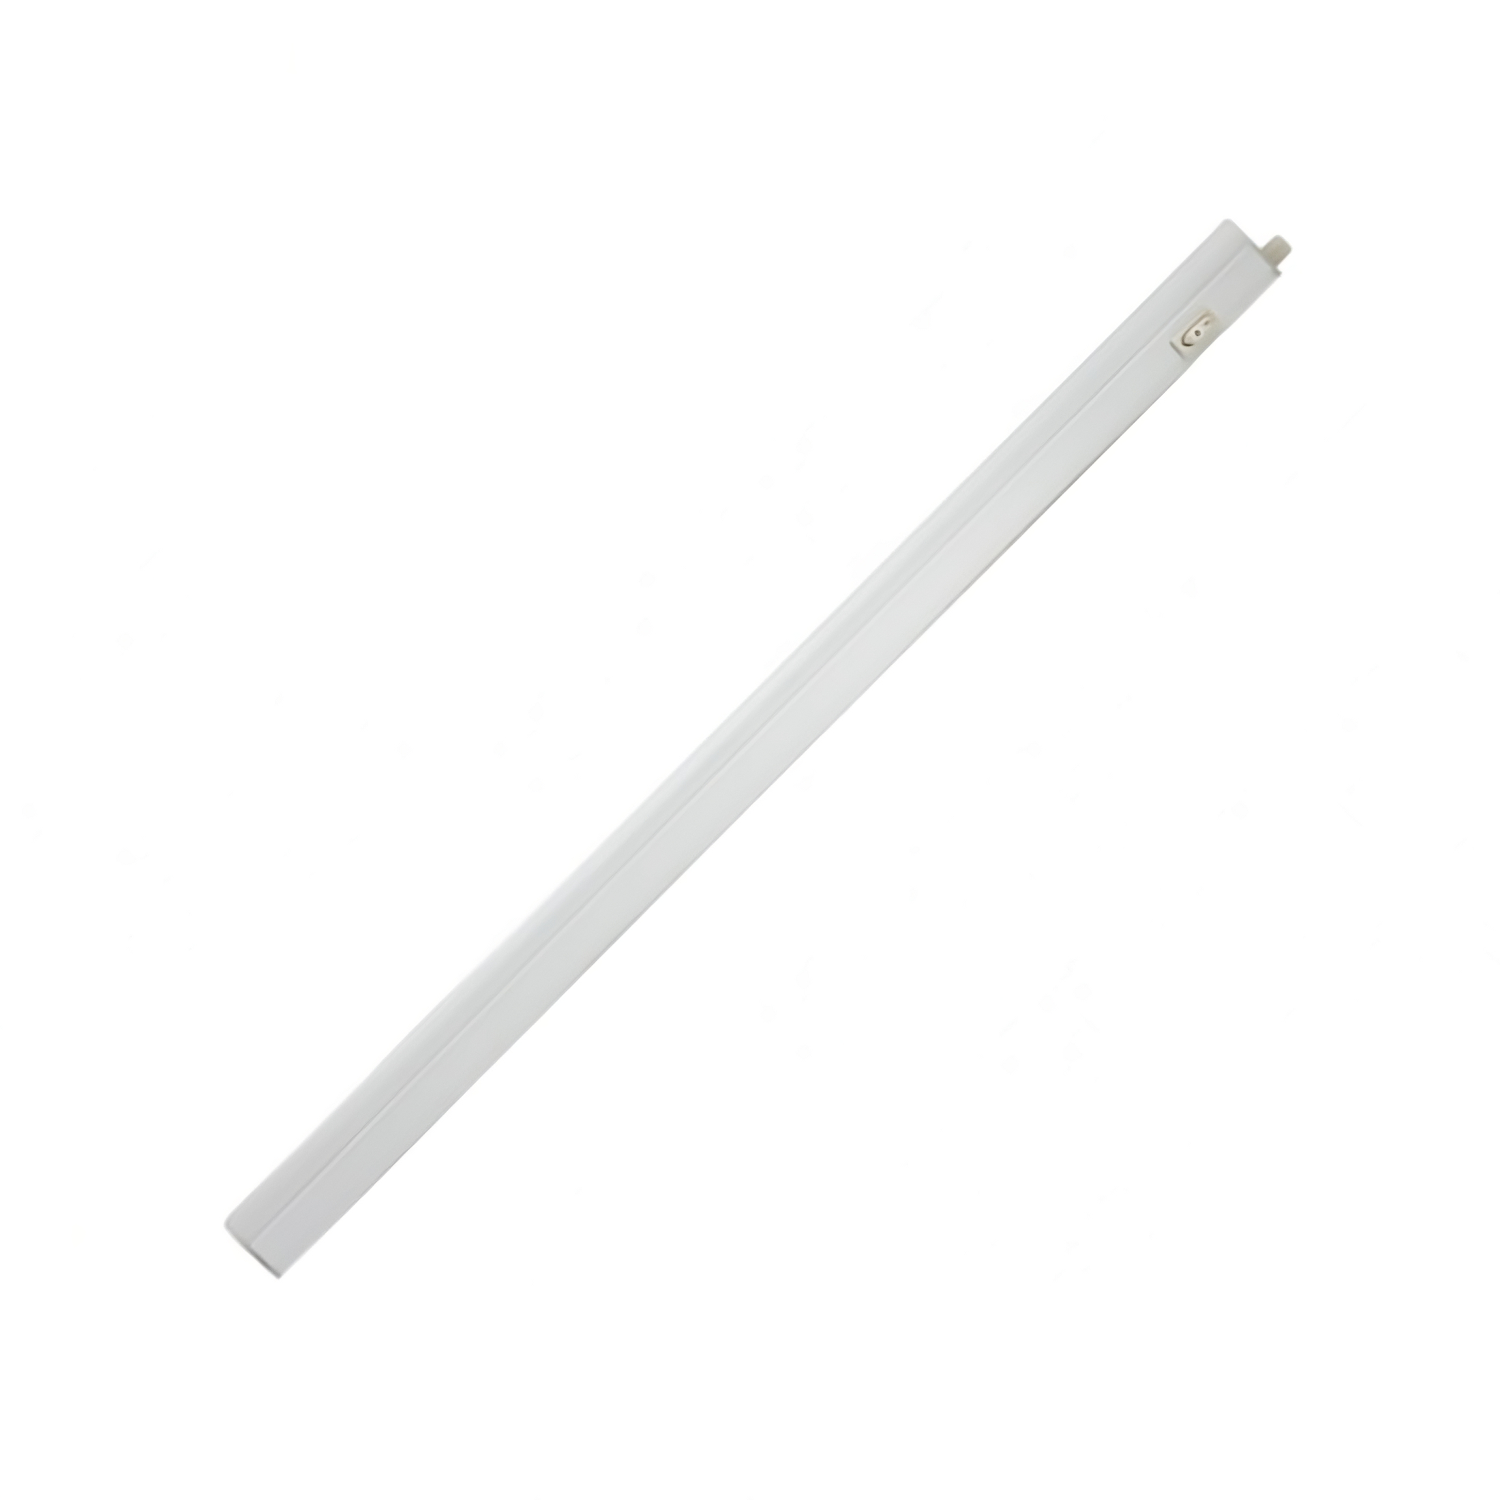 Product image of LED Strip Light 558mm with Plug and Lead